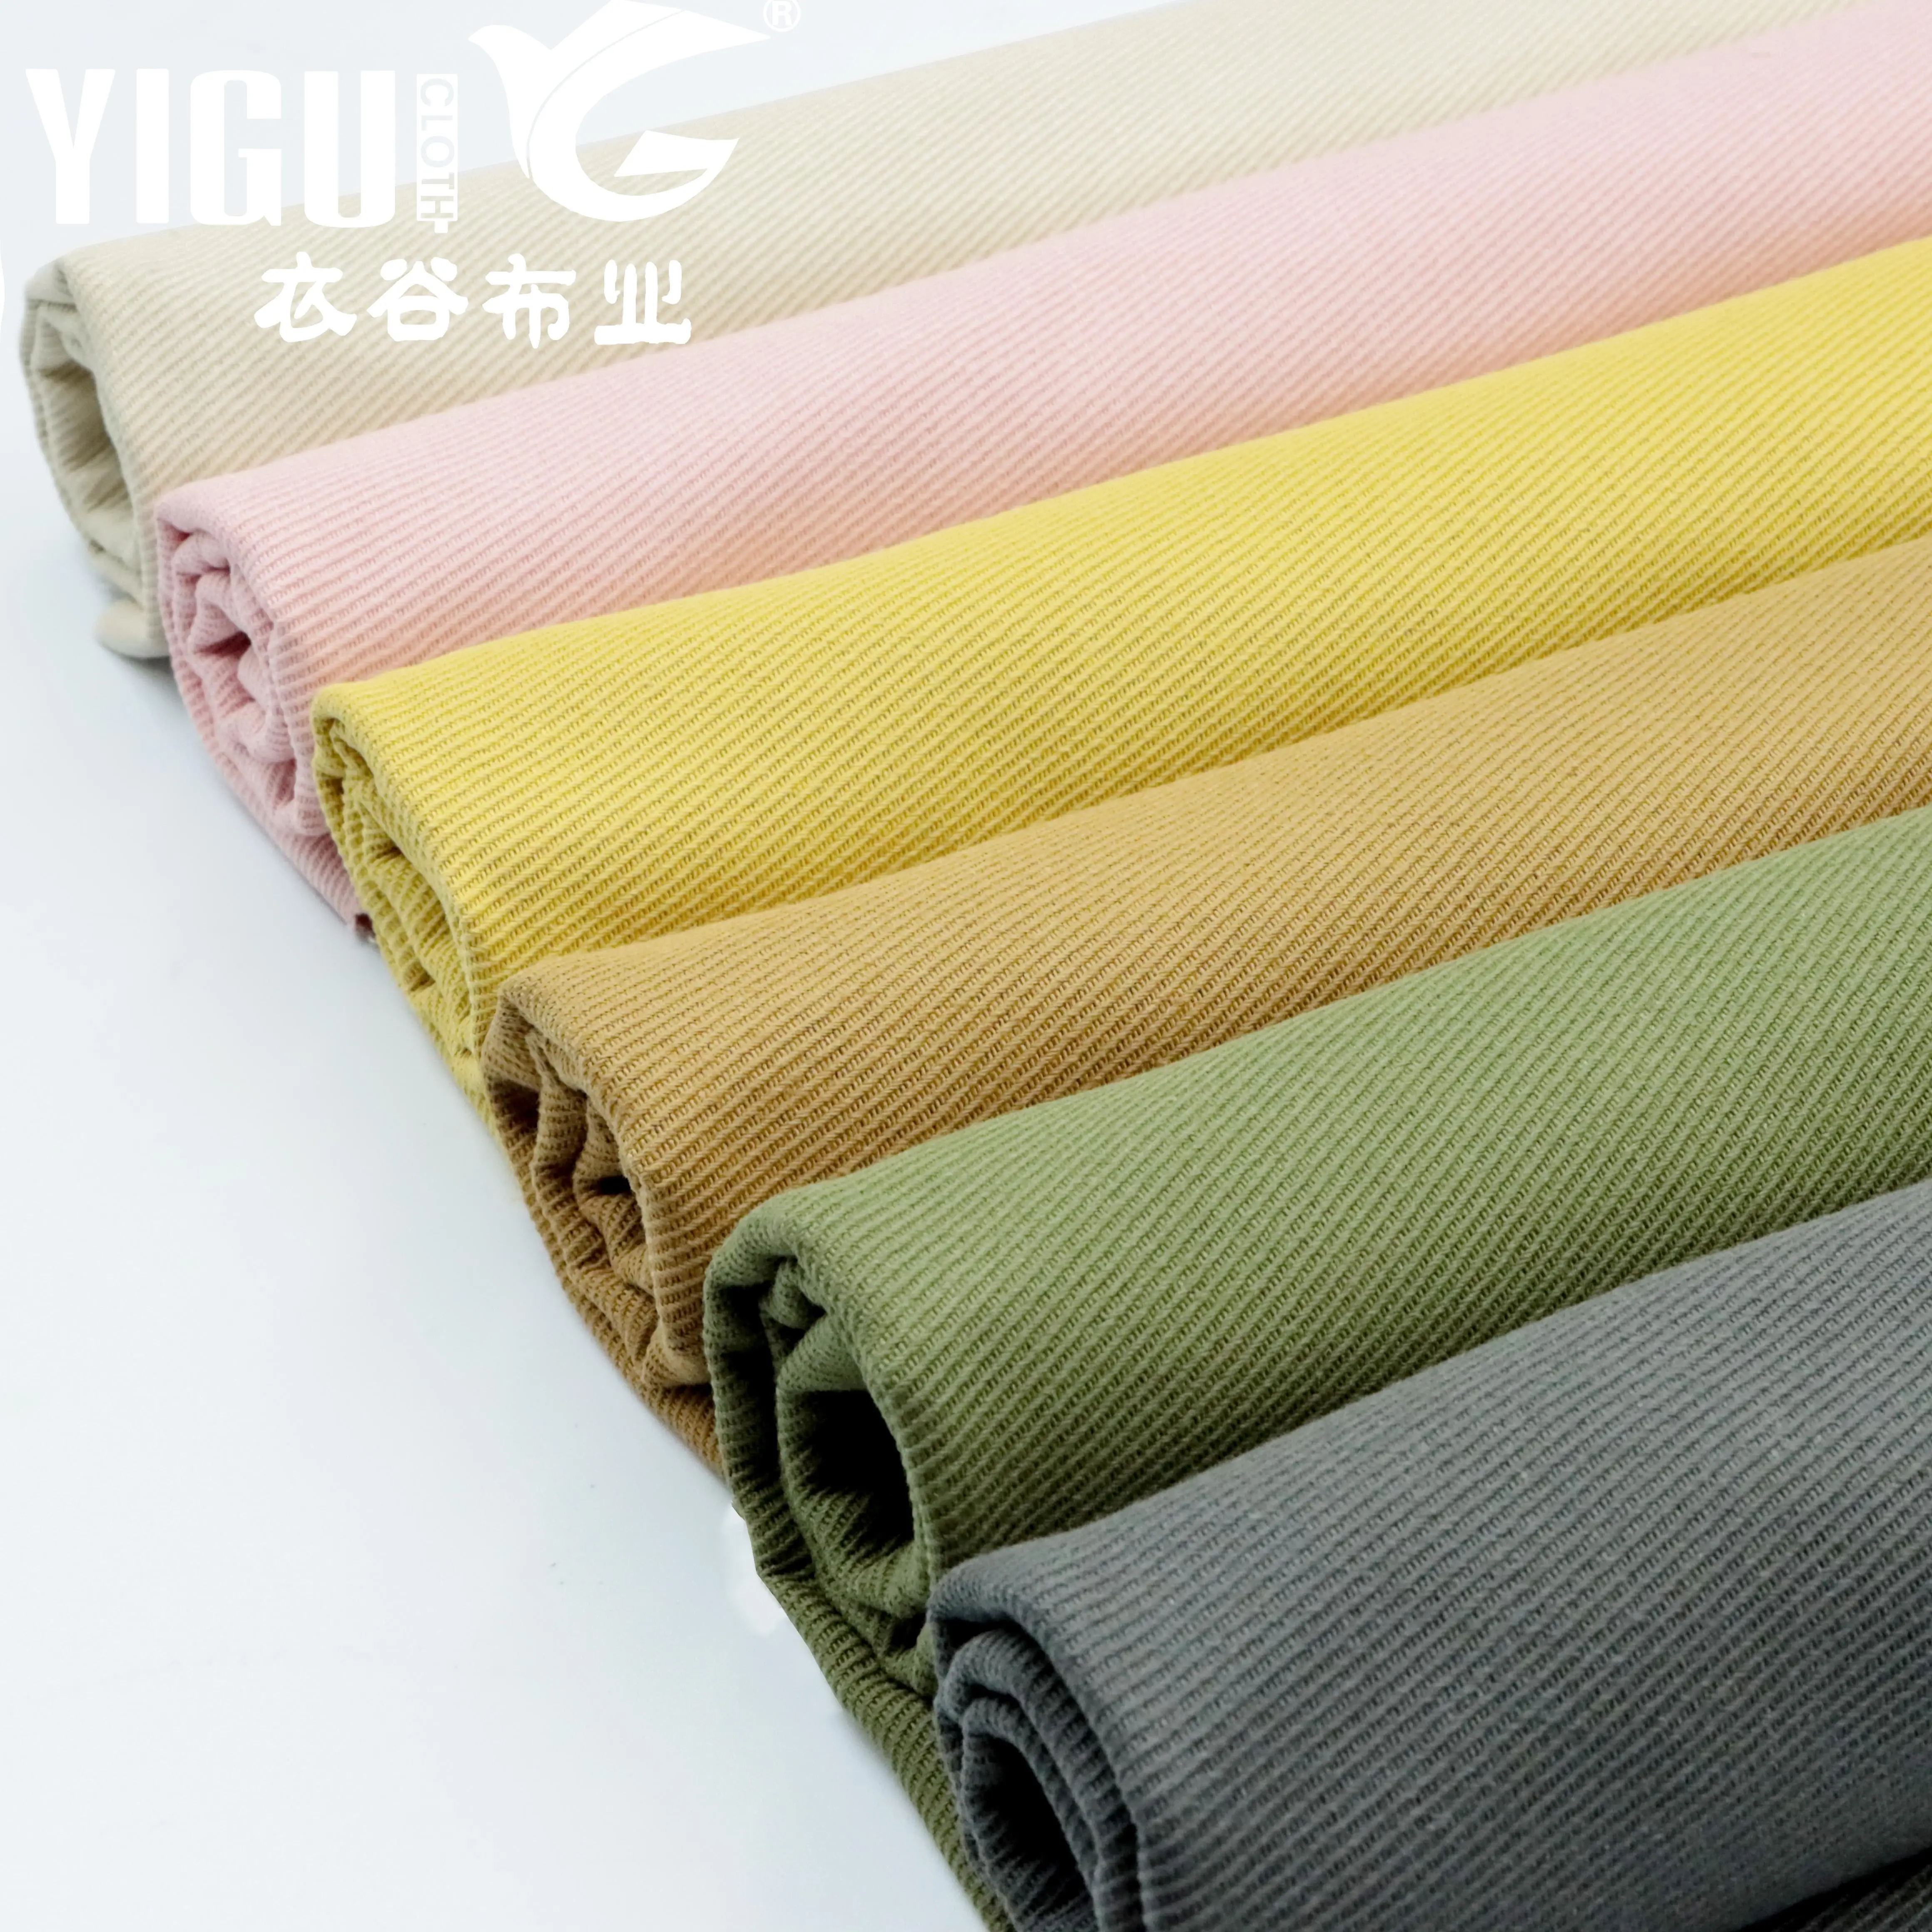 China Factory 100% Cotton Ammo Free Fabric High Quality And Soft Feeling Cotton Fabric Wash Will Not Fade Cotton Fabric